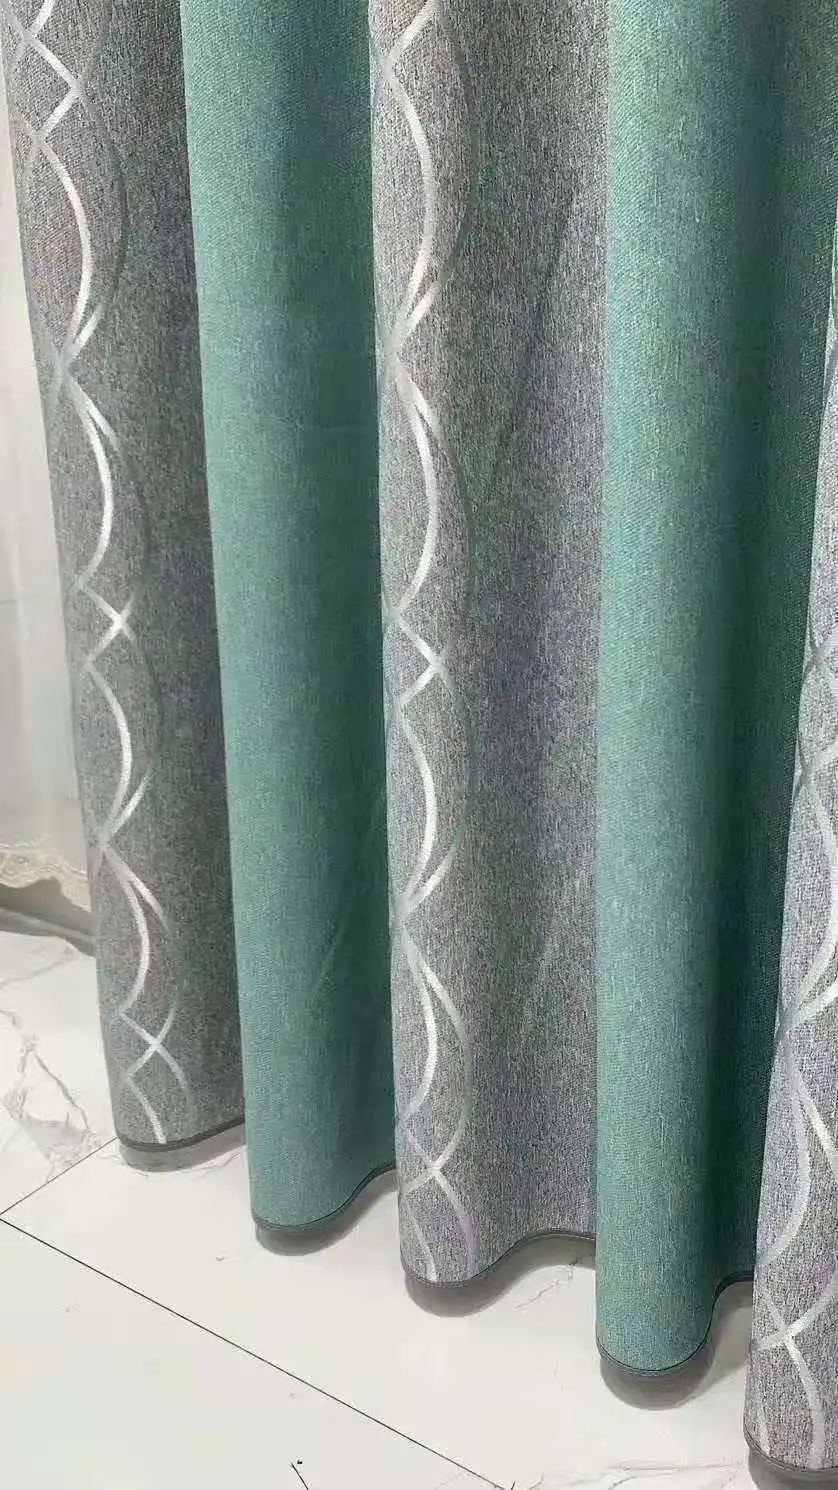 wholesale home curtain window ready made yellow and grey 2 colors matching luxury jacquard linen curtains for living room